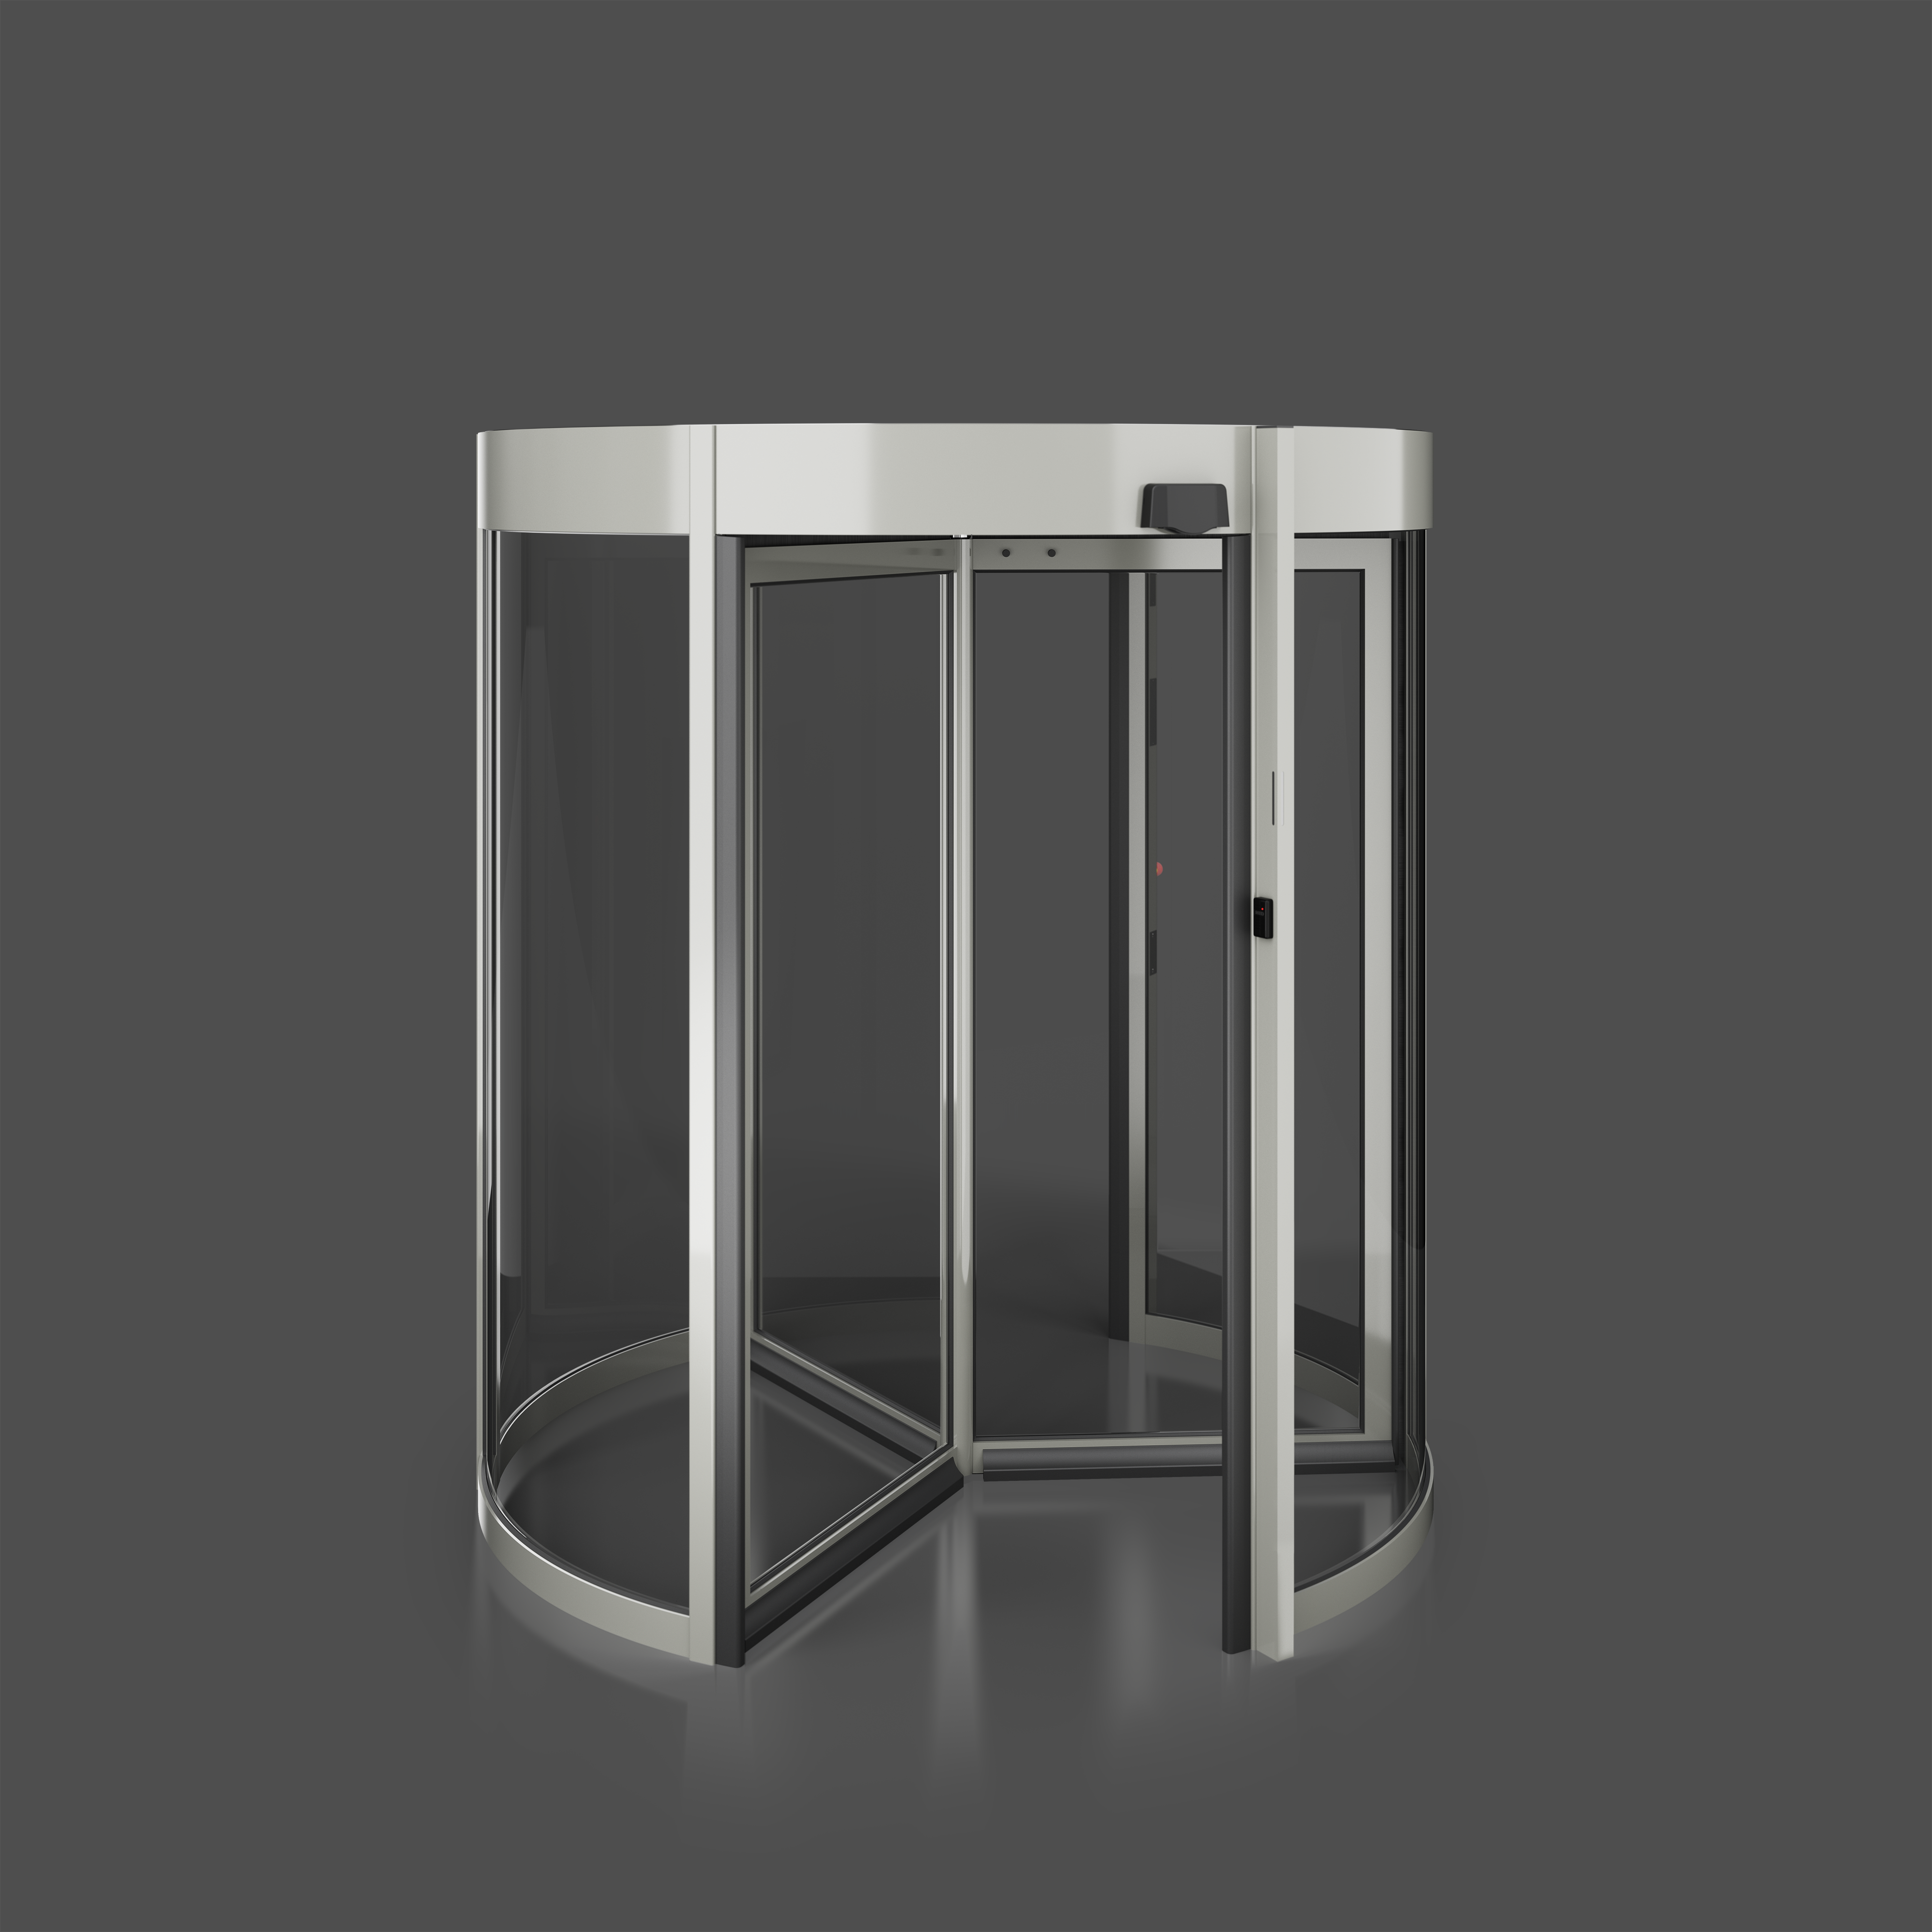 Boon Edam upgrades its high security revolving doors to be EN 17352 compliant